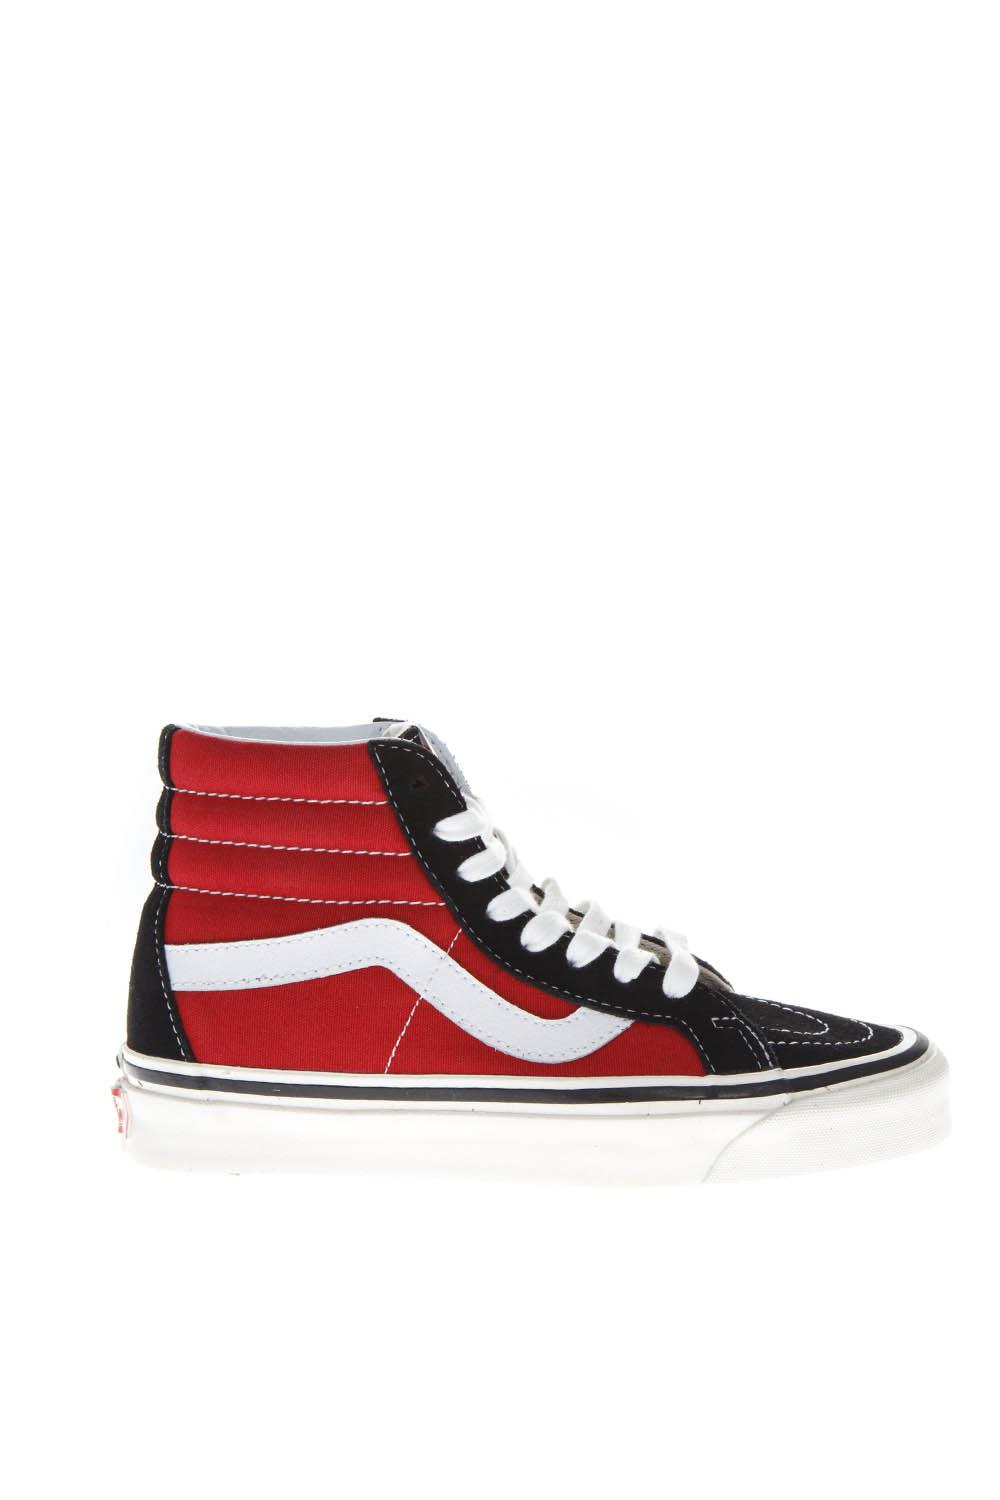 red and black vans high tops